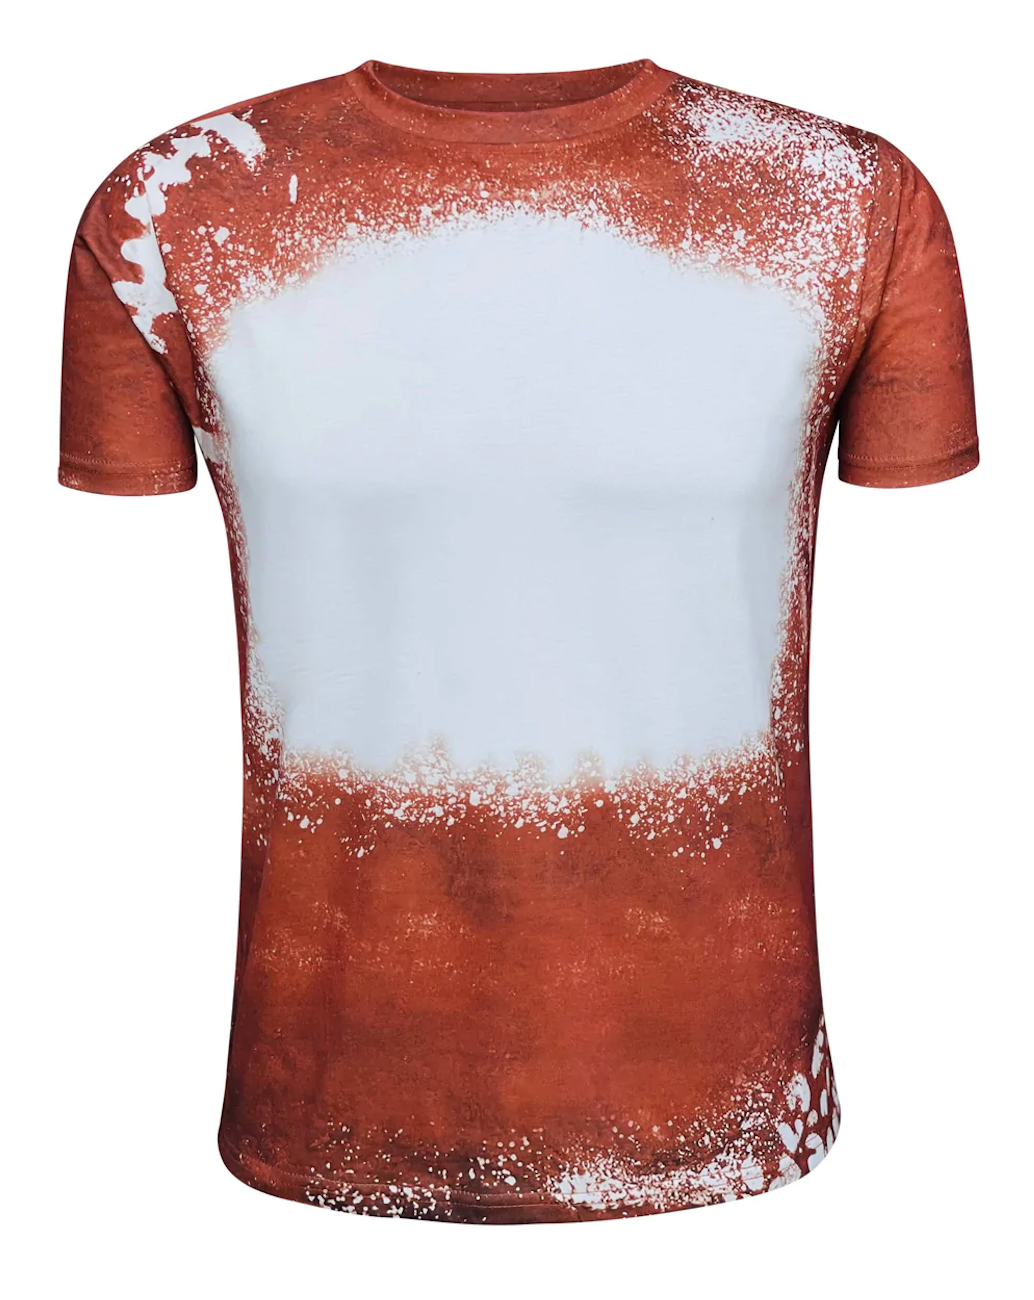 YOUTH Football/ Faux Bleached Shirts, ready for Sublimation